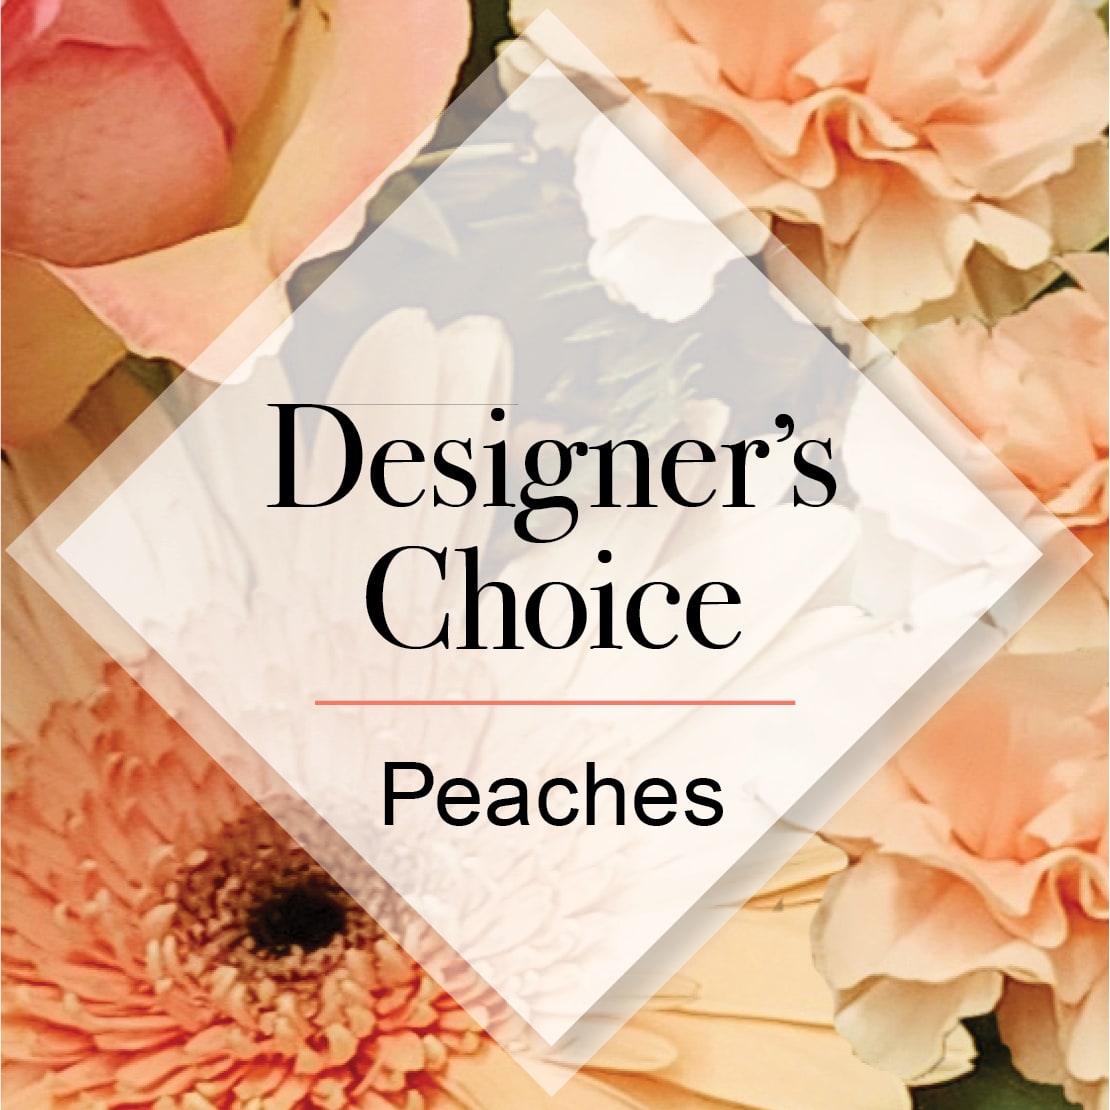 Designers Choice Peach - A selection that will be predominately the color that you have chosen with accents and greenery to compliment. The designers have the flexibility to create something unique and beautiful for you and is often the best value for you. If you have specifics you would like to request please include in the comments / special instructions area when placing your order.